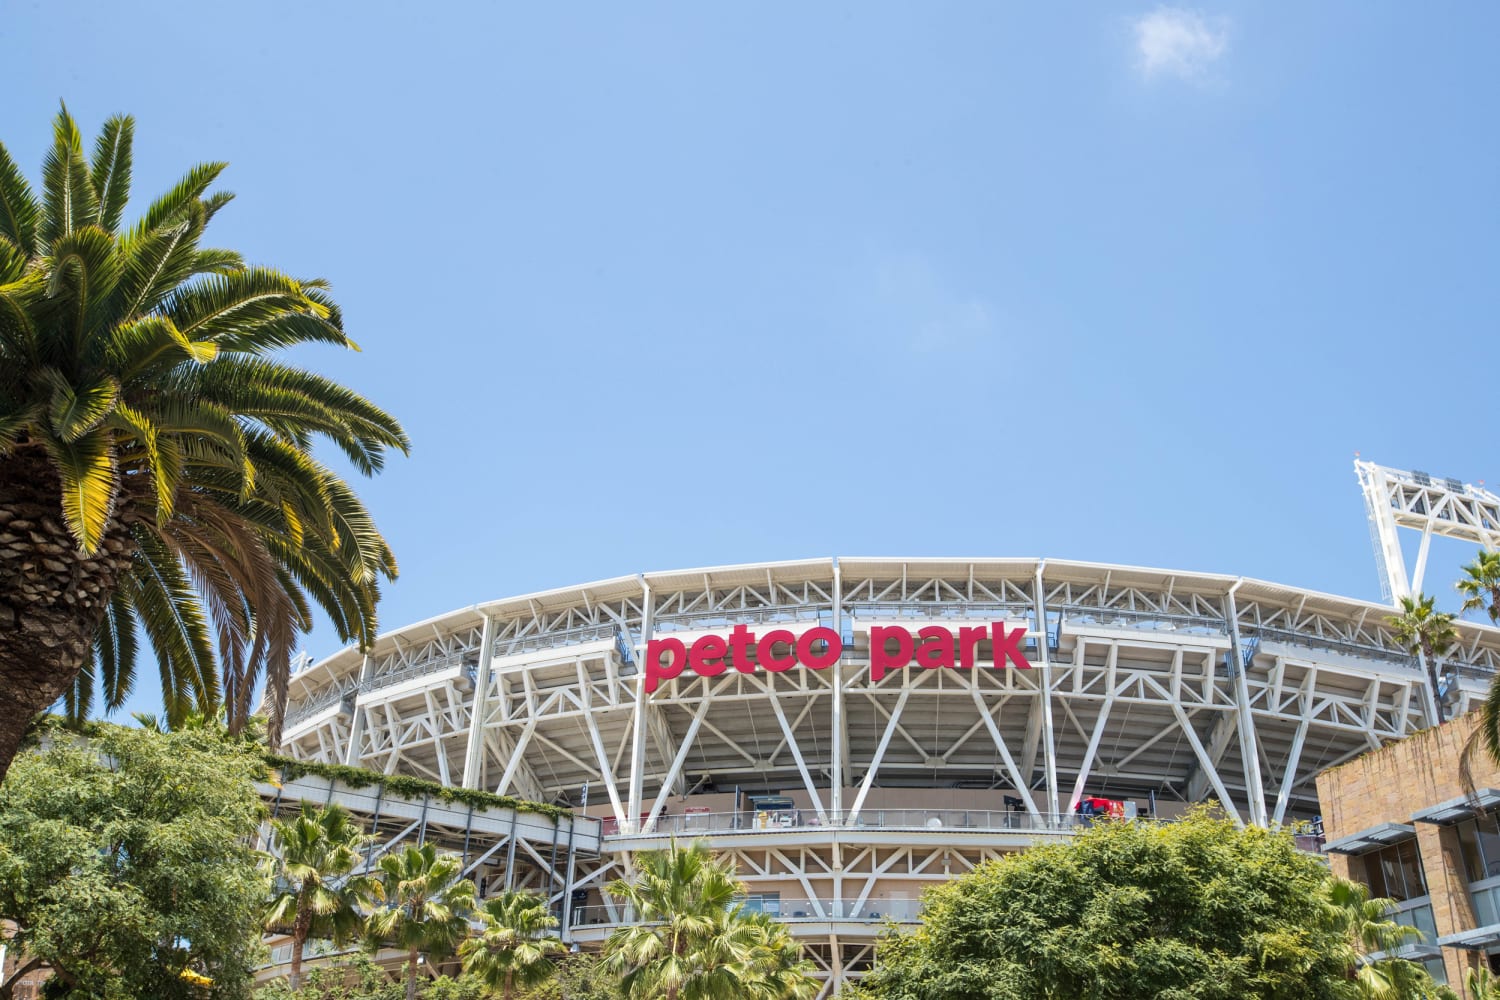 Padres fan and her son die after 'suspicious' fall at Petco Park